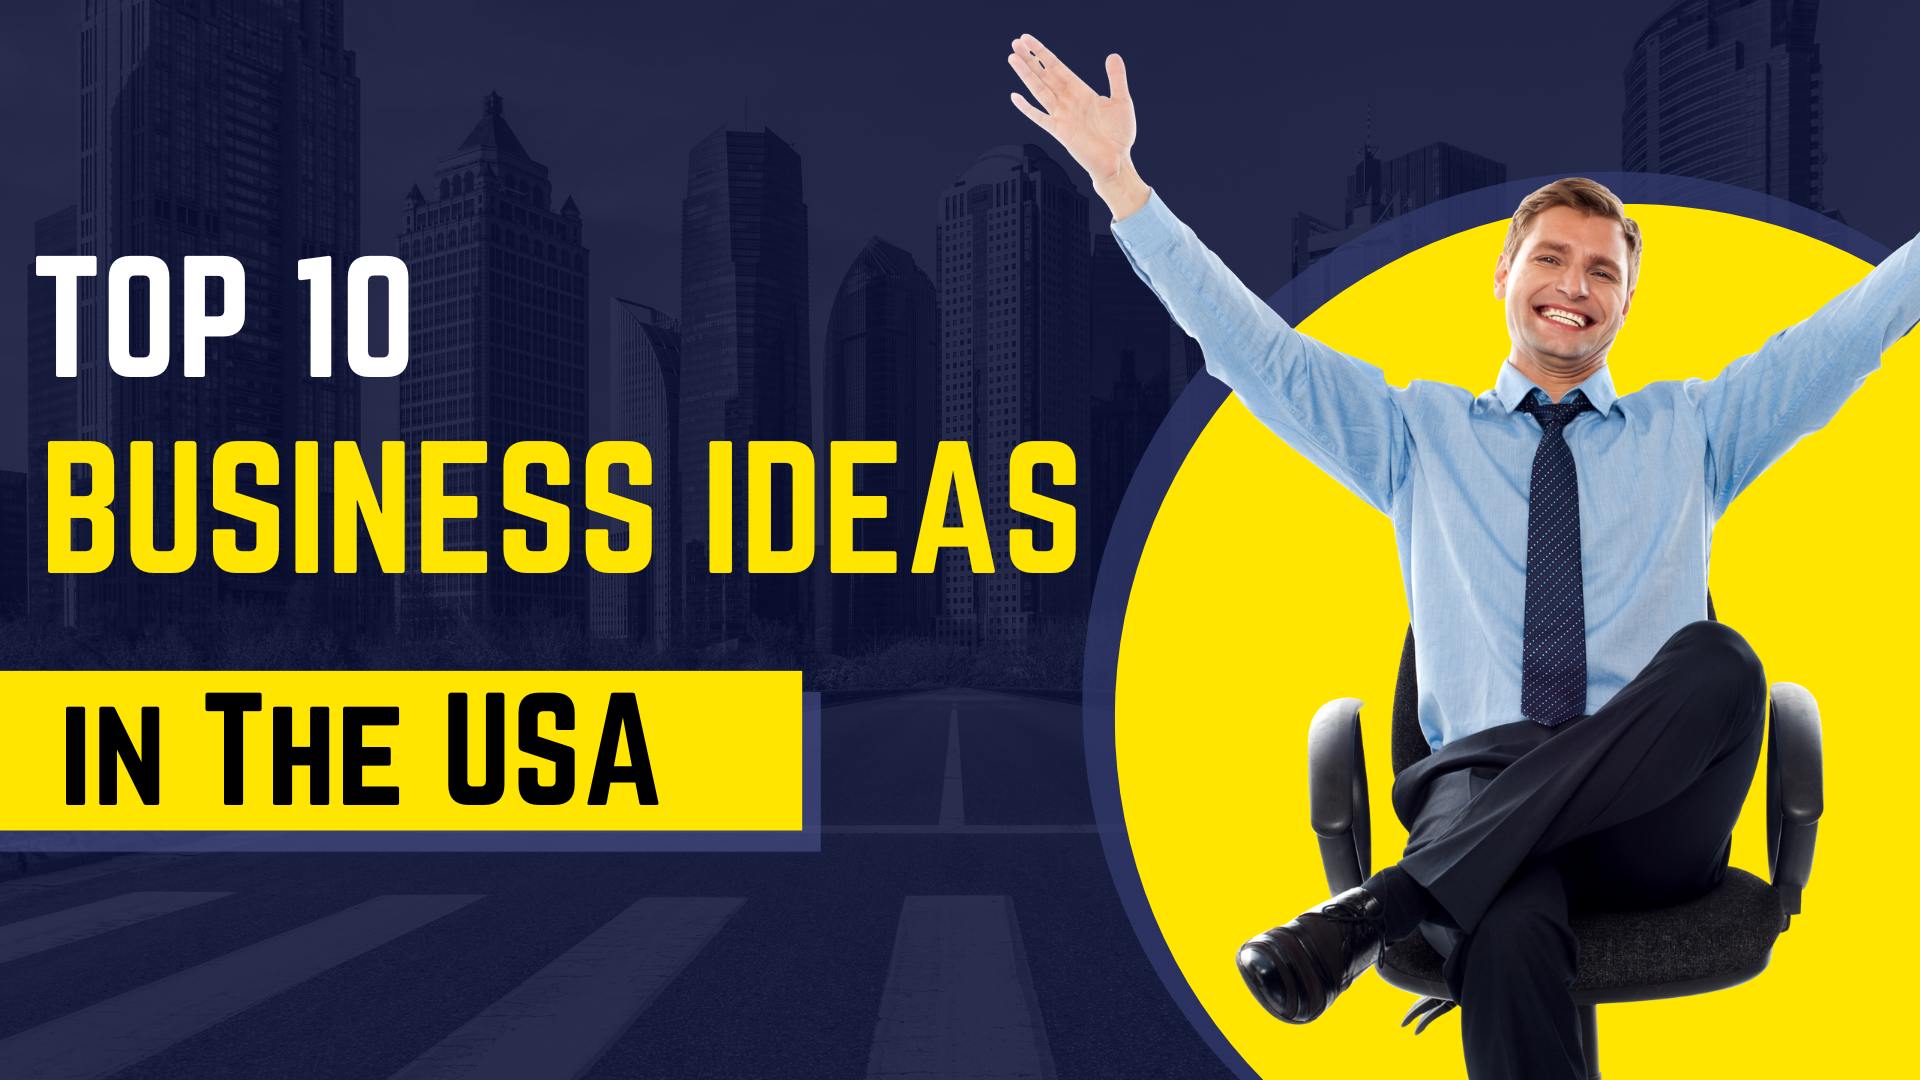 Top 10 Business Ideas in The USA